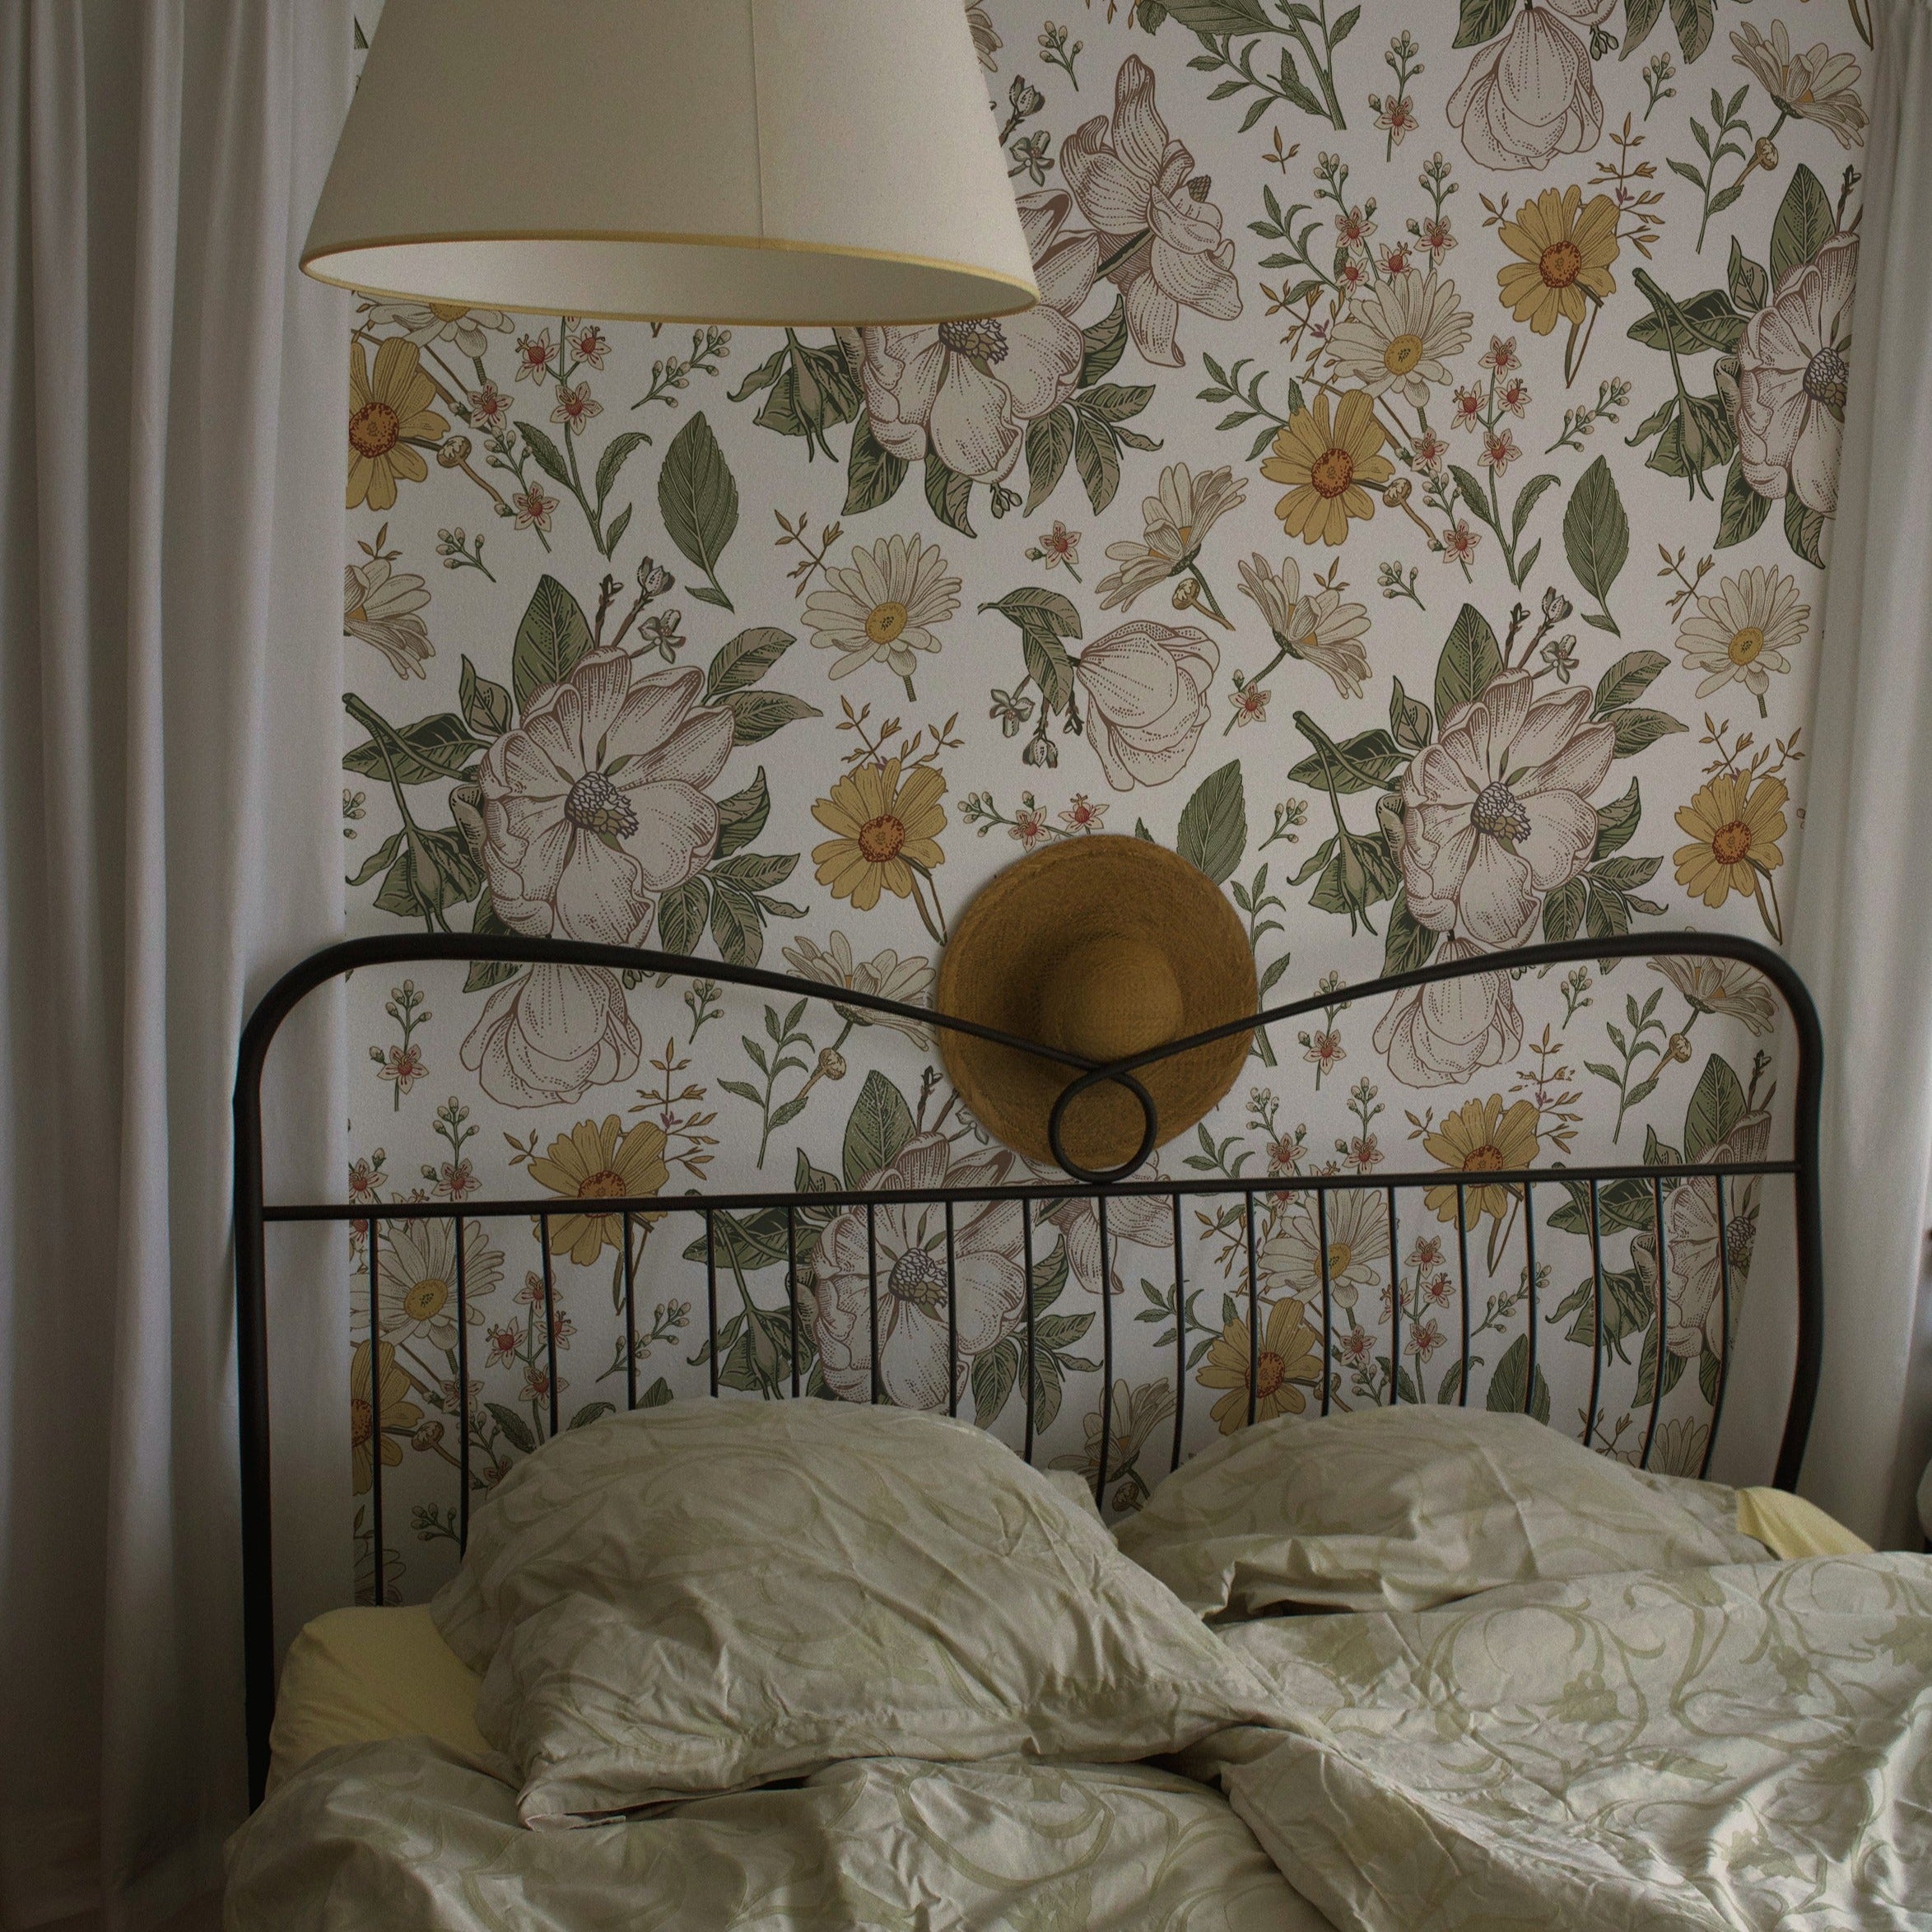 a bedroom scene where the "Floral Wallpaper - Sunny II" adds a bright and cheerful background. The playful yet elegant pattern brings a sense of joy and serenity to the bedroom, pairing beautifully with the simple bedding and natural textures.